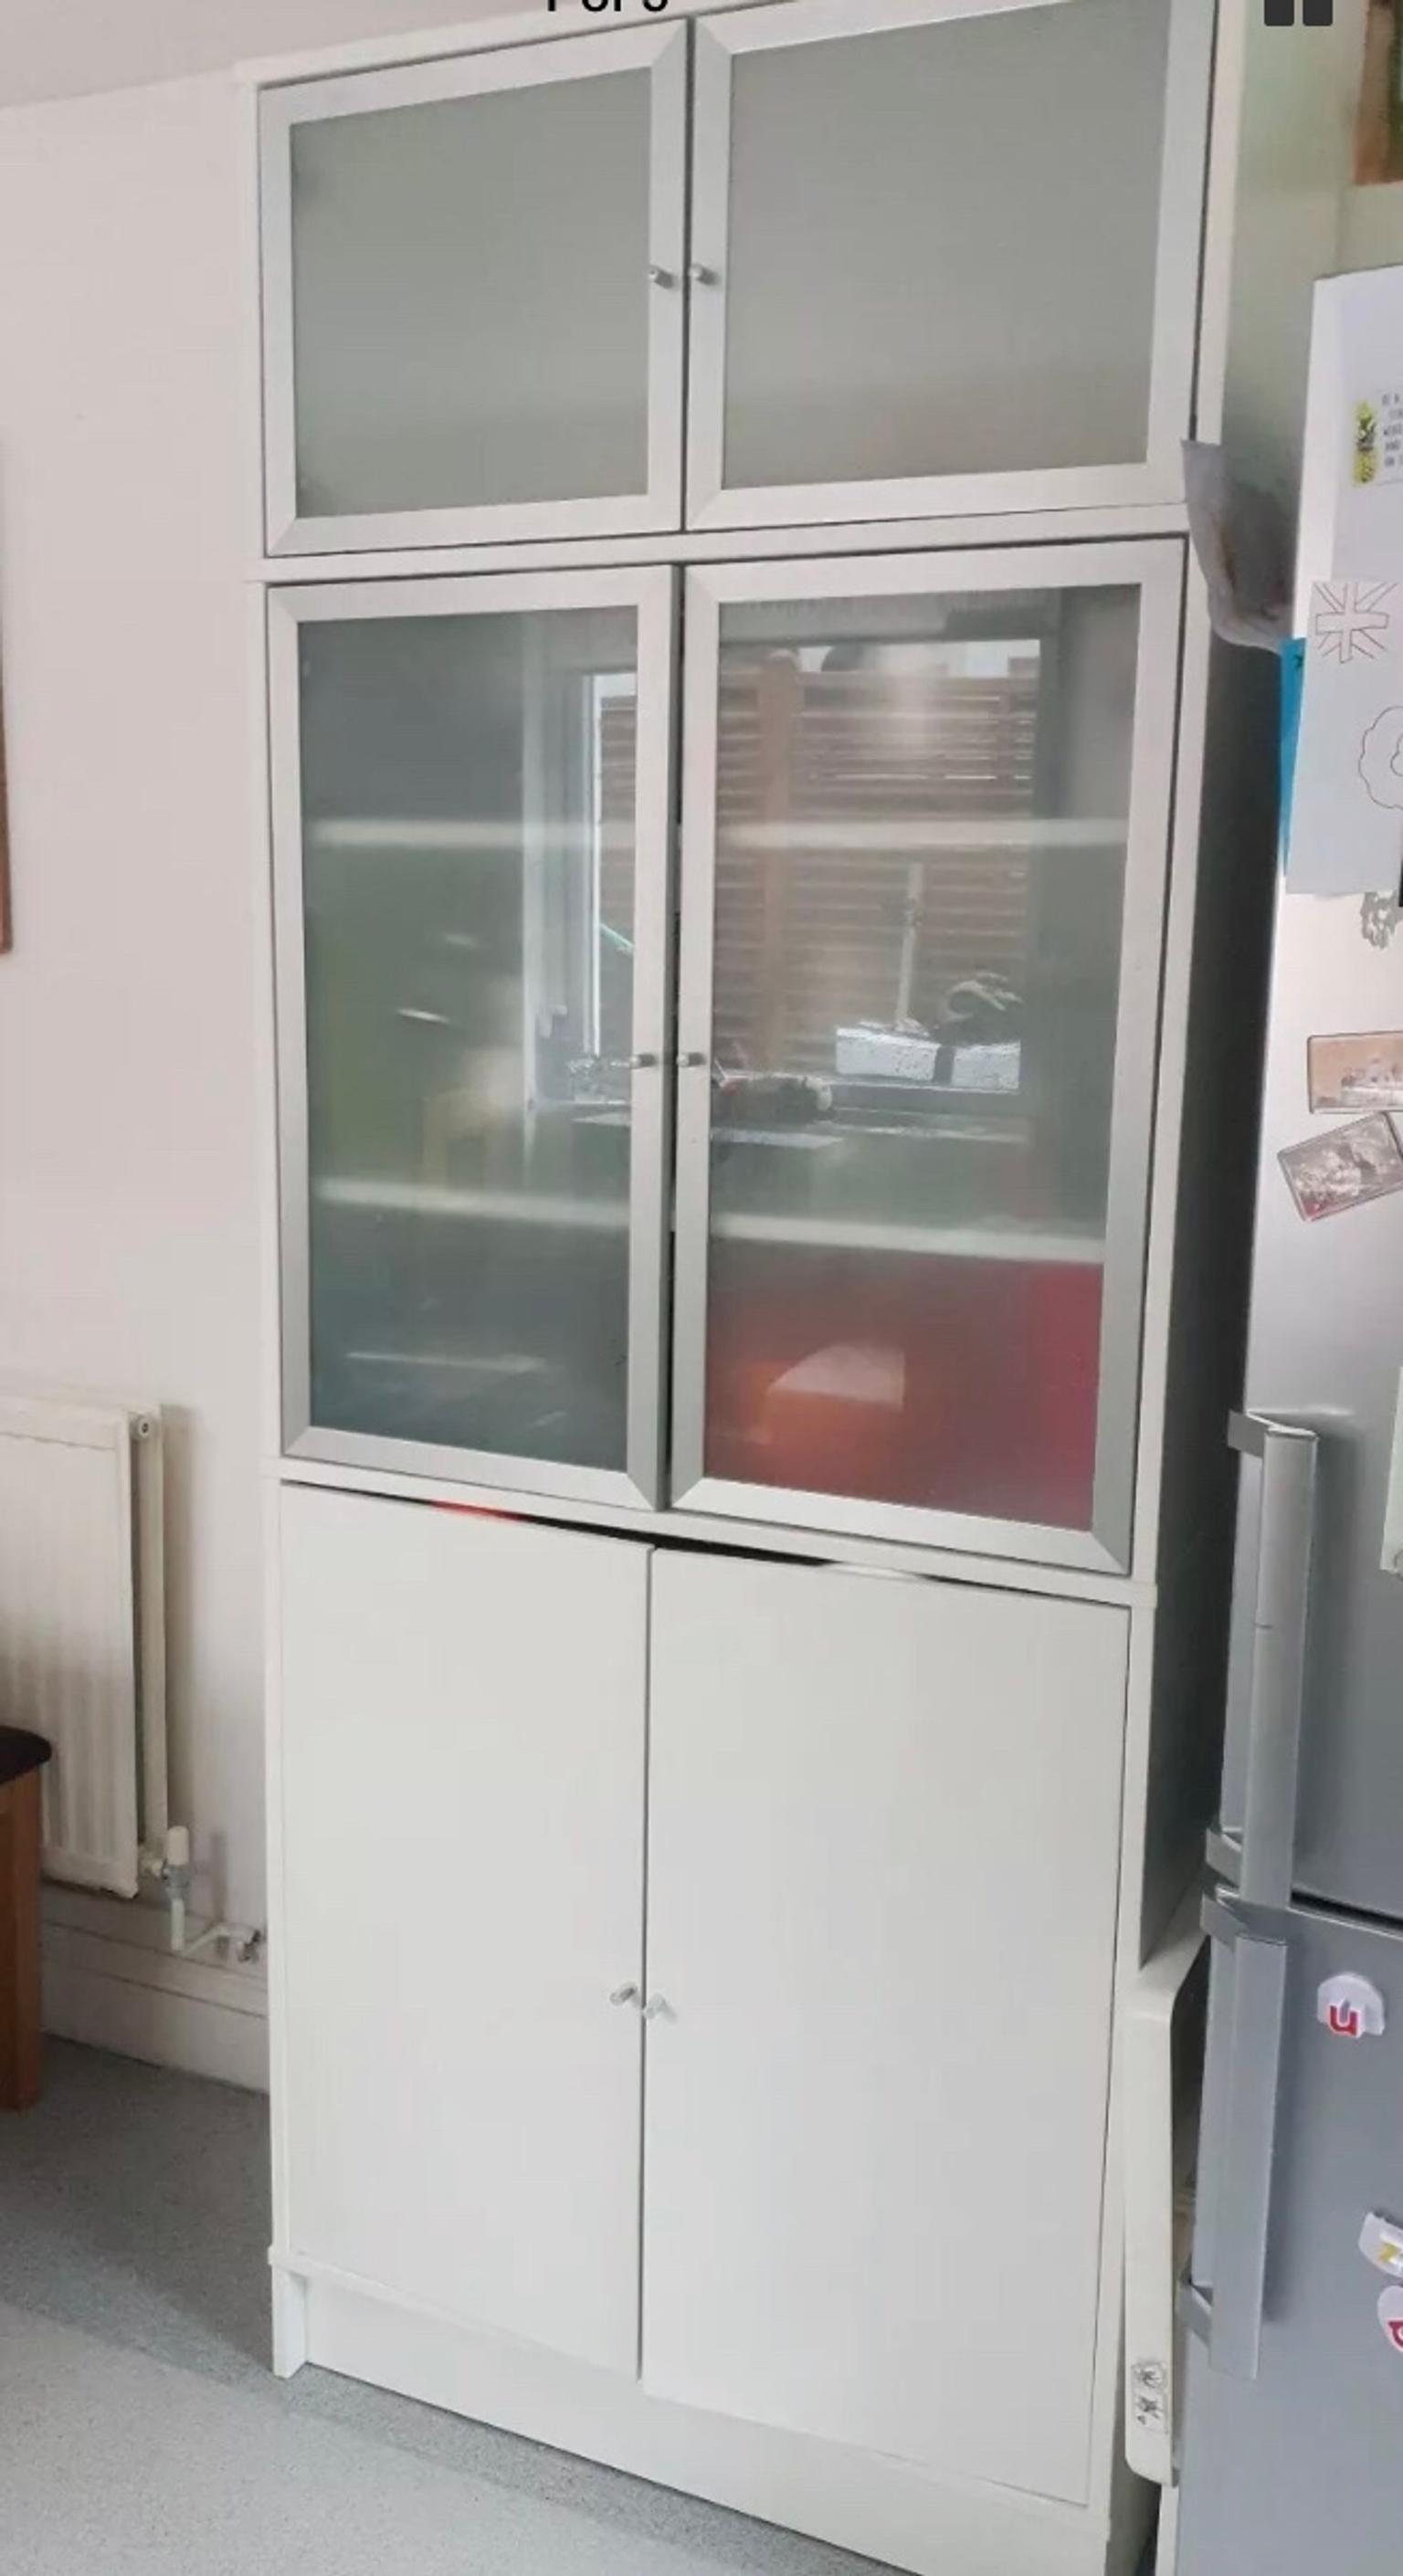 Ikea Tall Kitchen Storage Cabinet Cupboard In N1 Islington For 10000 For Sale Shpock